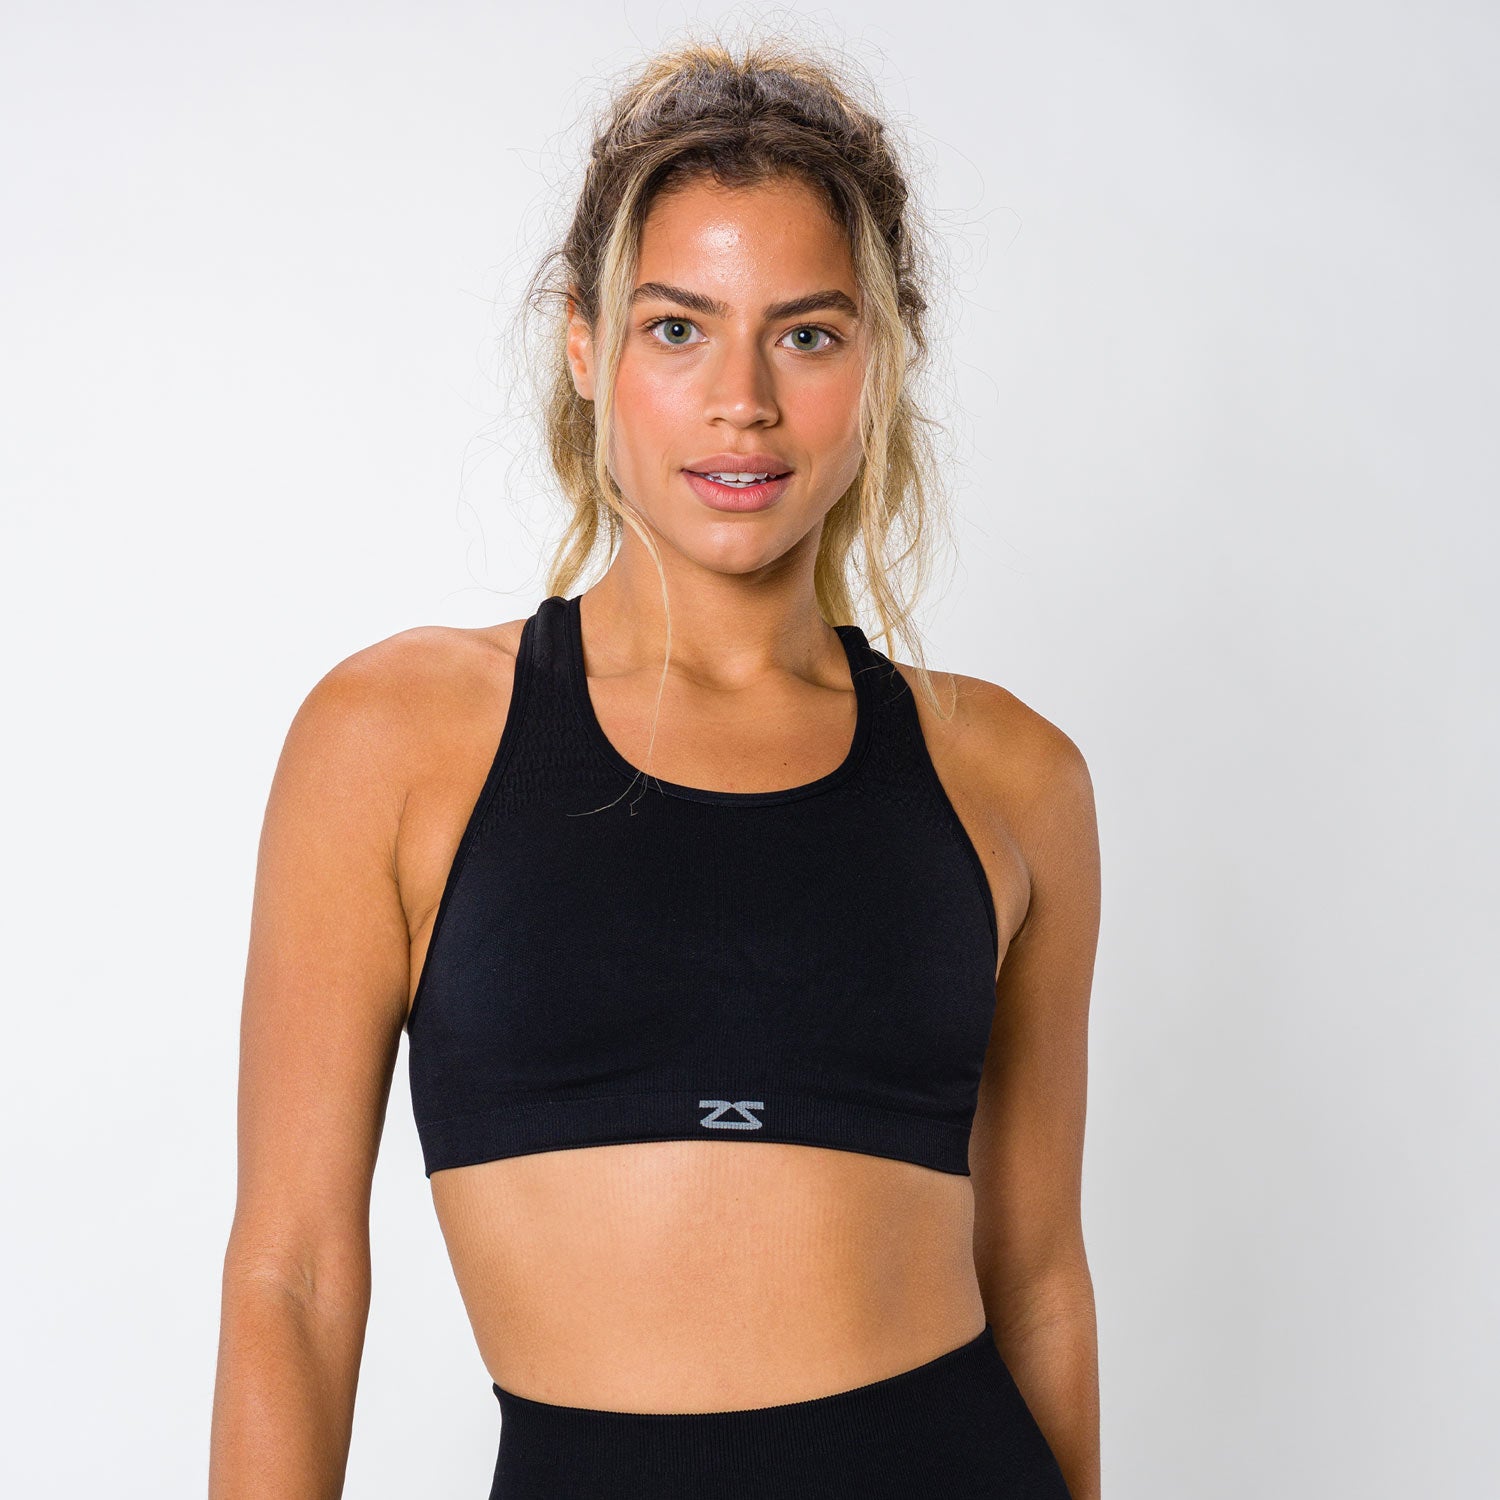 ZYIA Grid Bra Product Review 